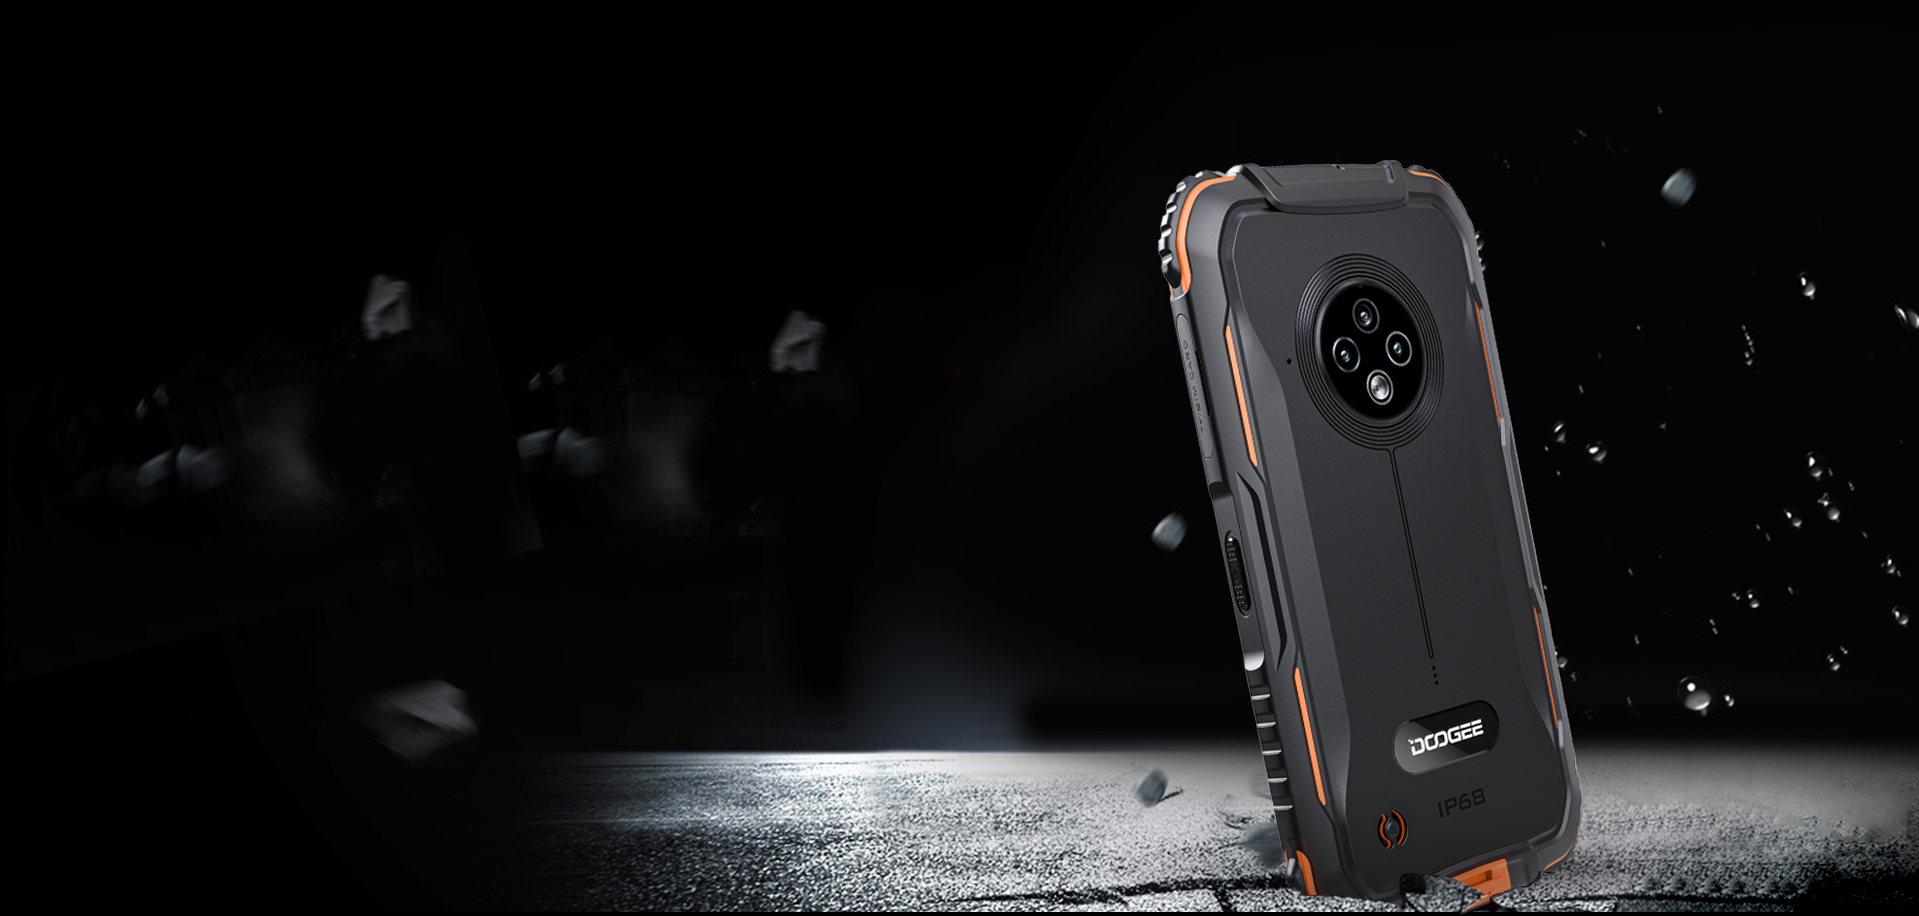  Constructed tough with rubber reinforced edges for extra protection | DOOGEE Doogee S35T